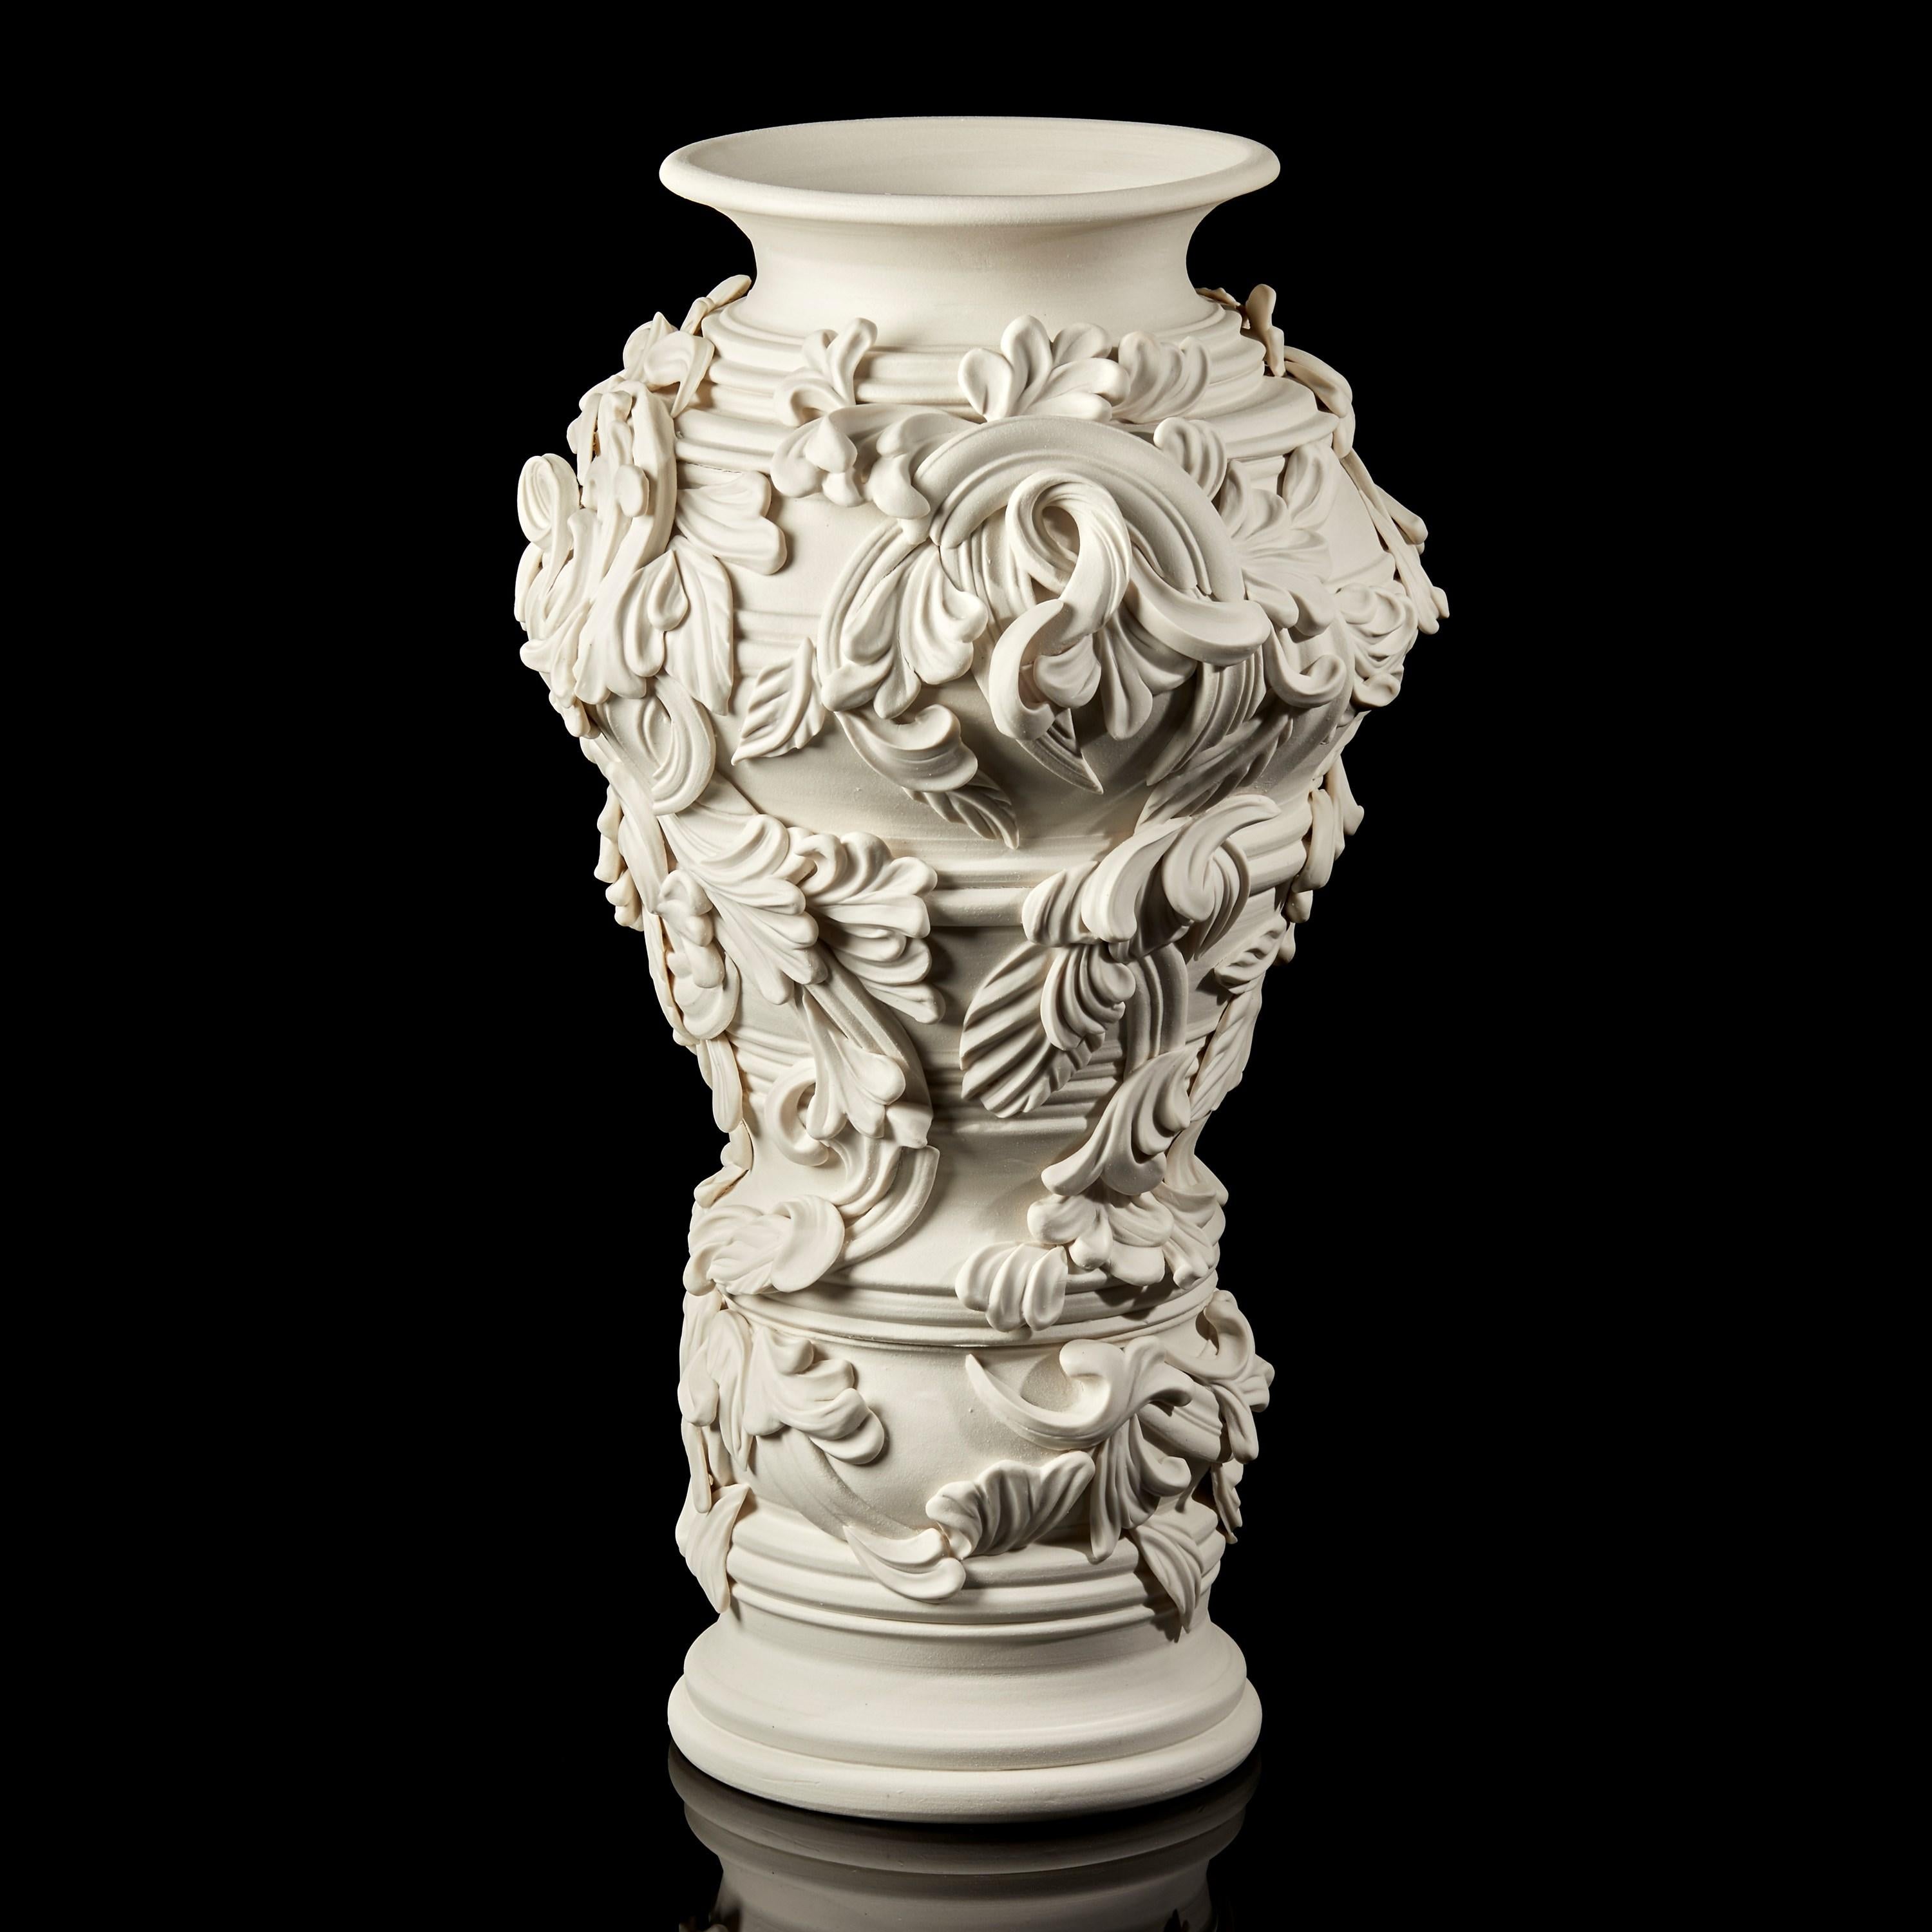  Promenade V, a Unique Ceramic Sculptural Tall Vase in Porcelain by Jo Taylor In New Condition For Sale In London, GB